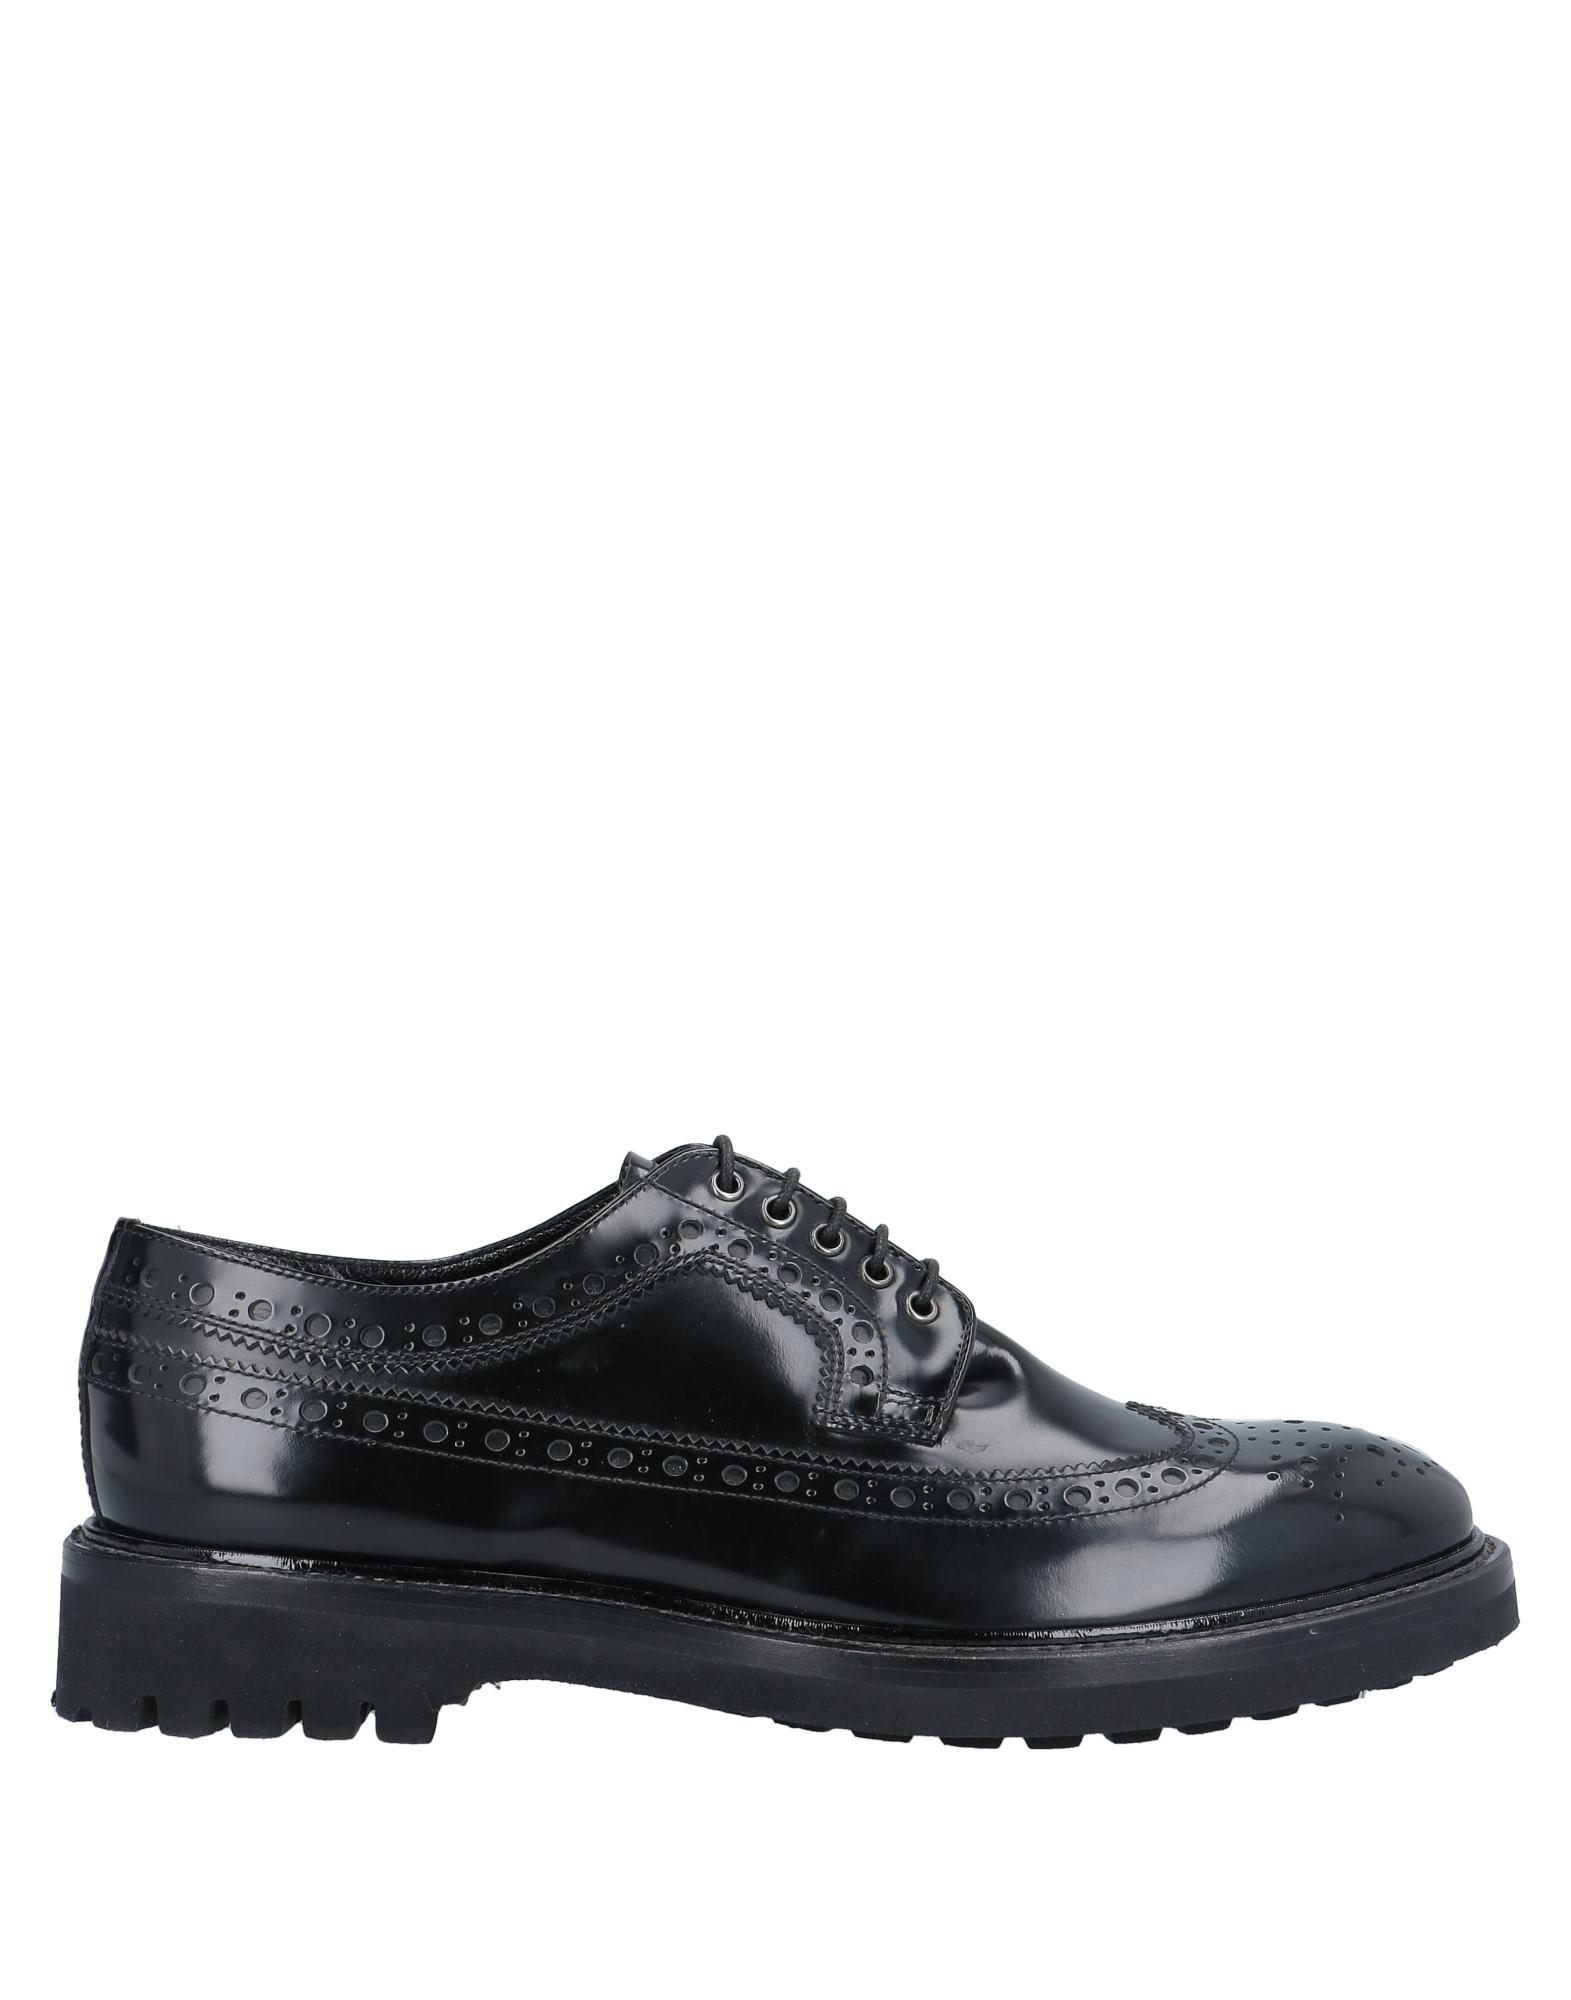 Barracuda Leather Lace-up Shoe in Black - Lyst